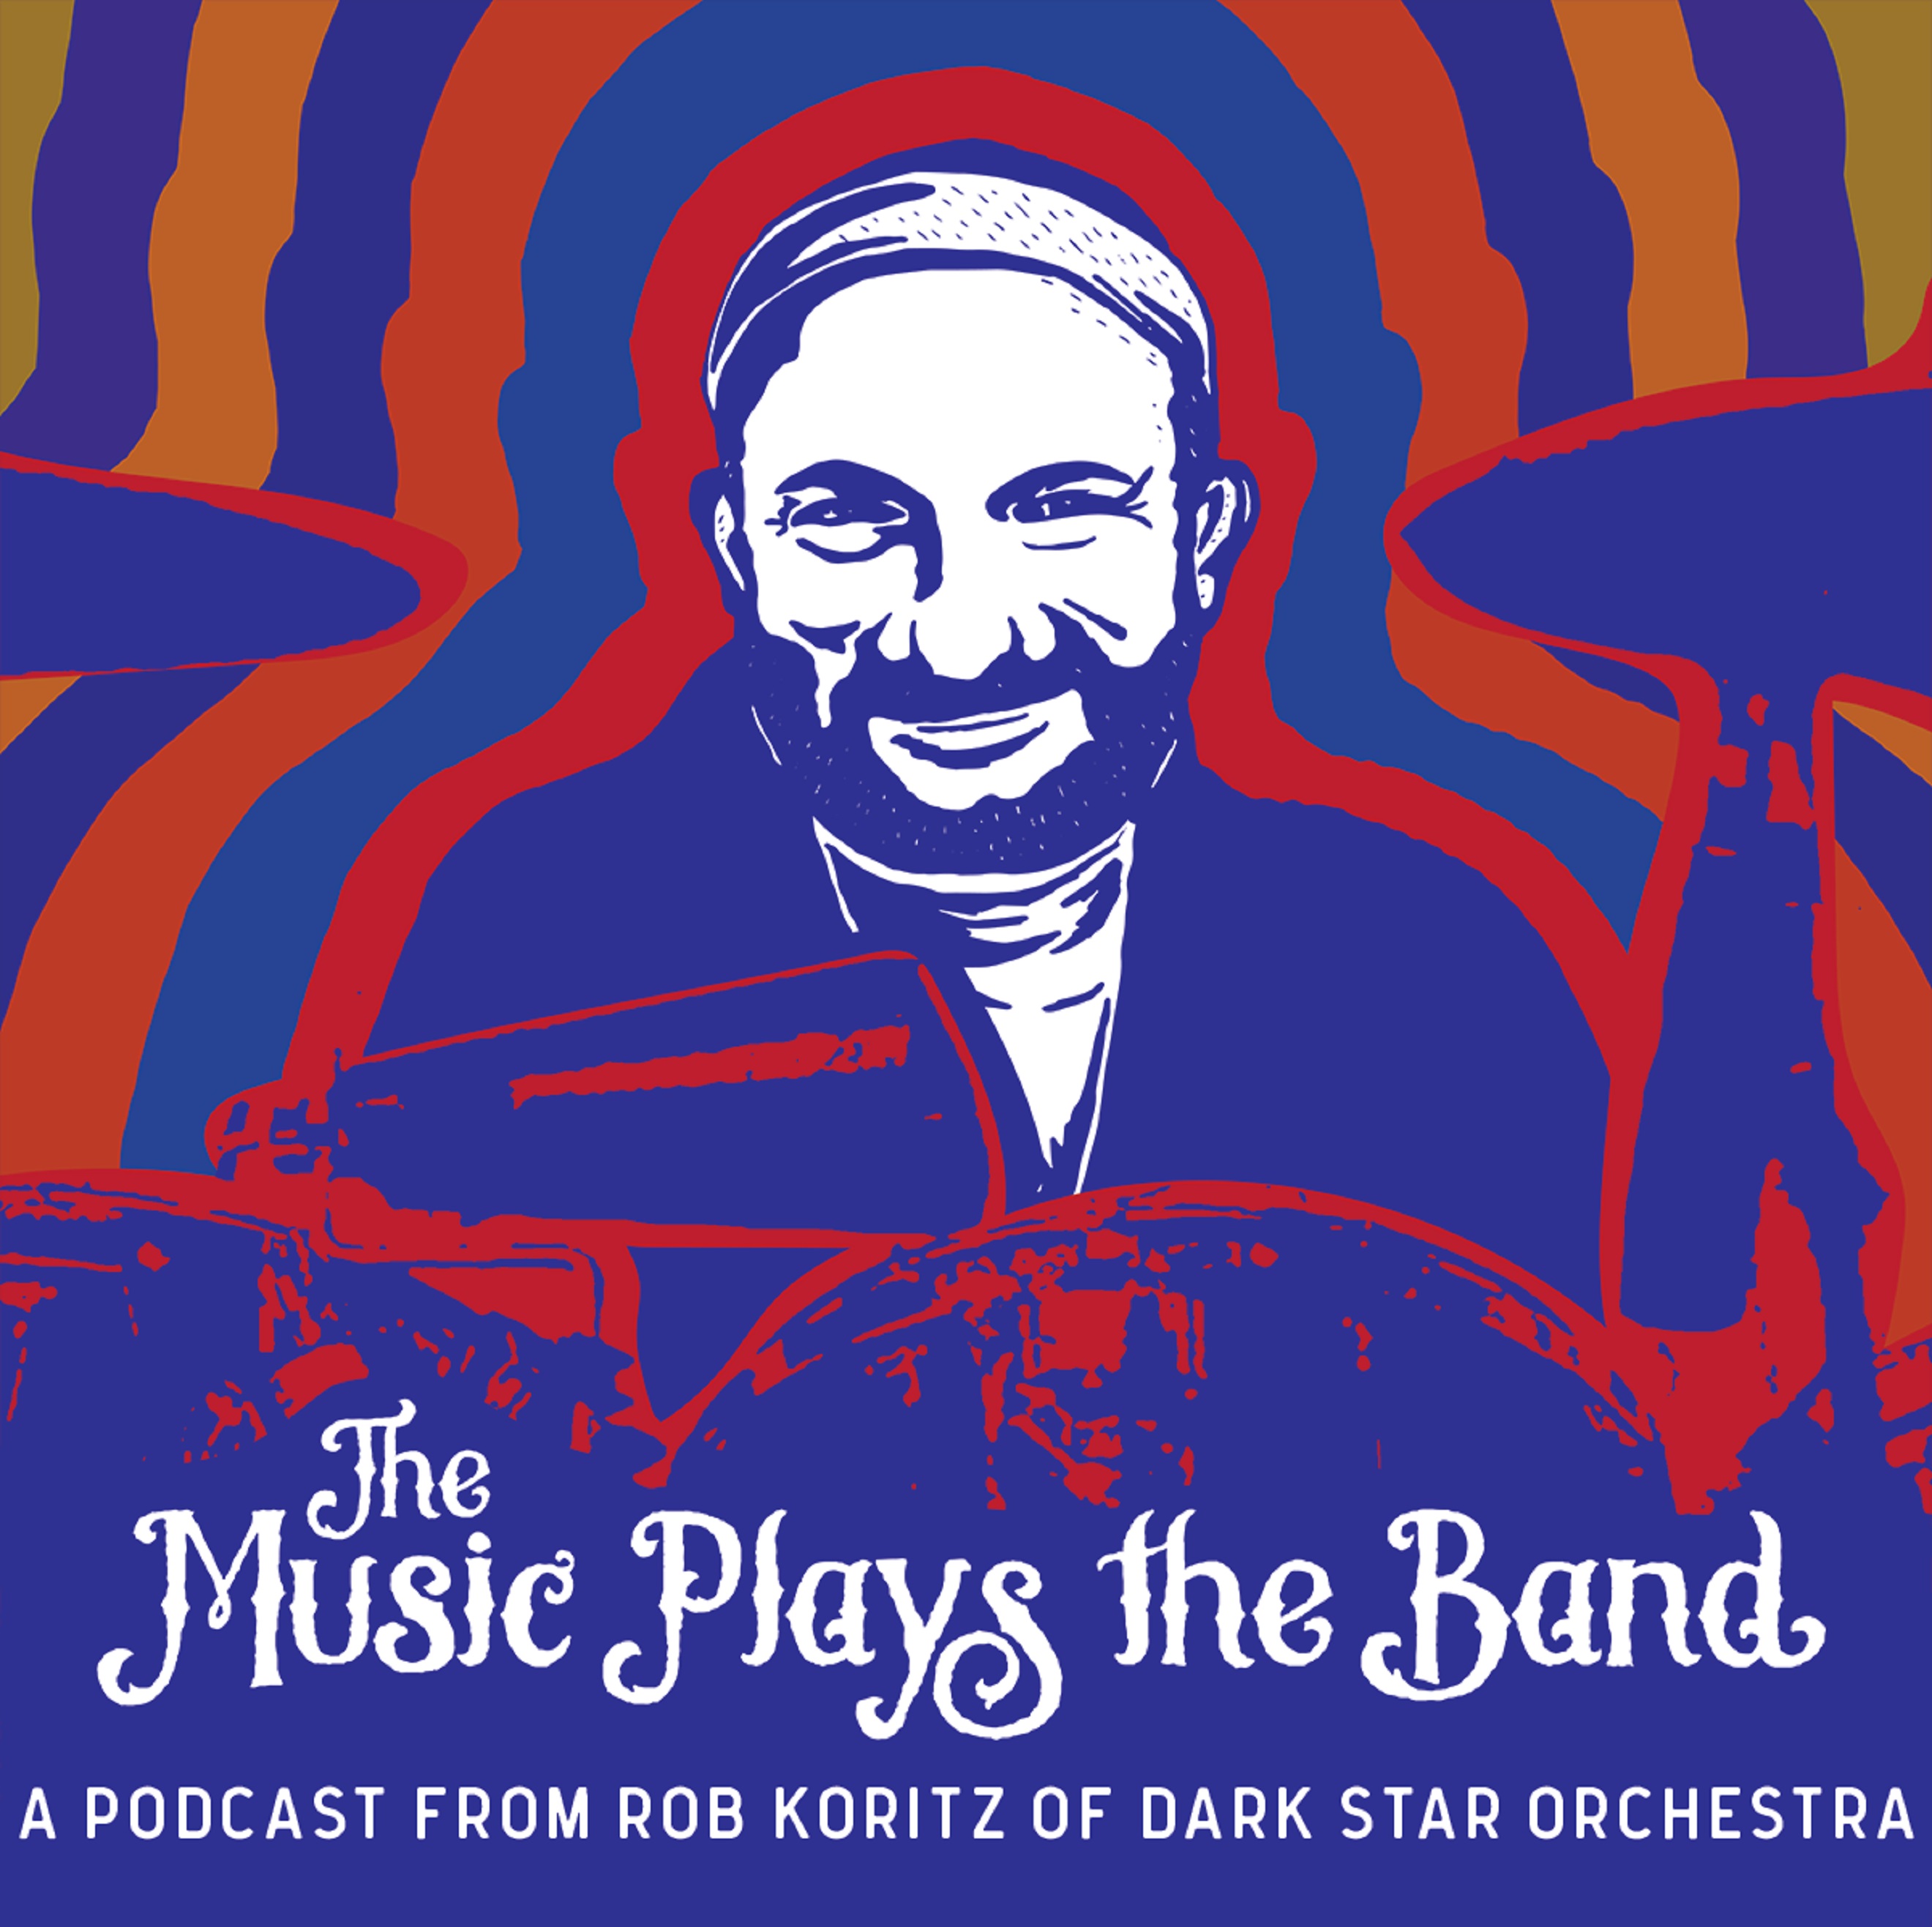 Dark Star Orchestra Drummer Rob Koritz Launches ‘The Music Plays the Band’ Podcast